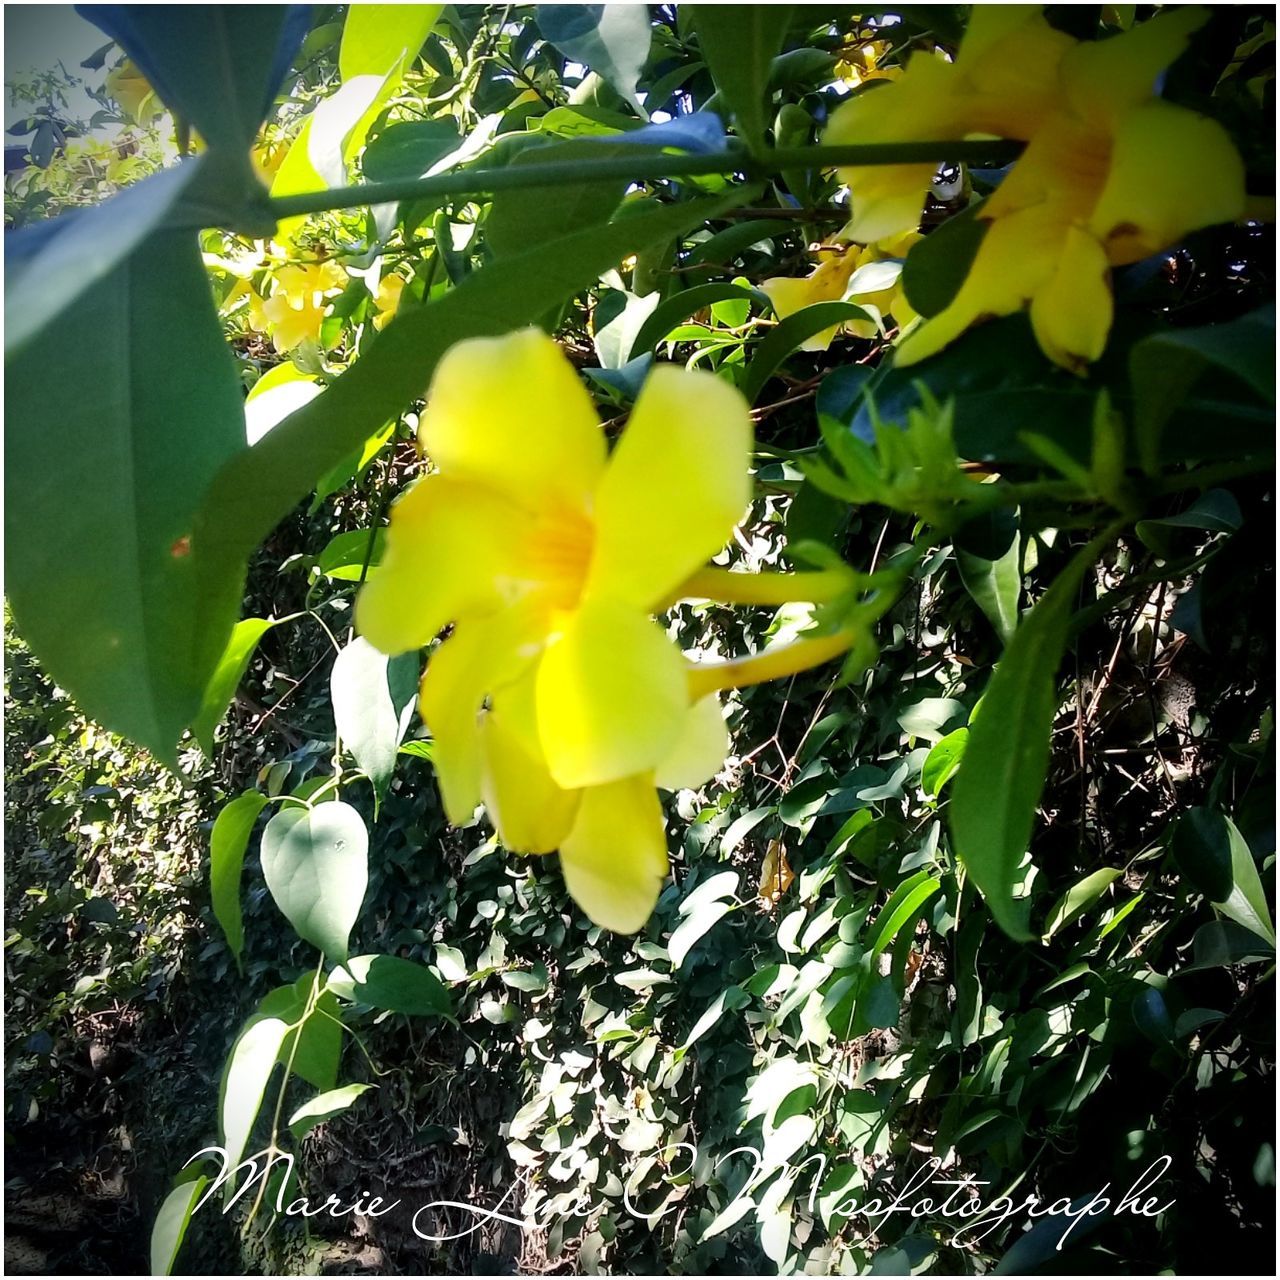 growth, flower, plant, flowering plant, beauty in nature, vulnerability, freshness, fragility, yellow, petal, close-up, inflorescence, flower head, nature, no people, day, leaf, plant part, botany, blossom, springtime, outdoors, spring